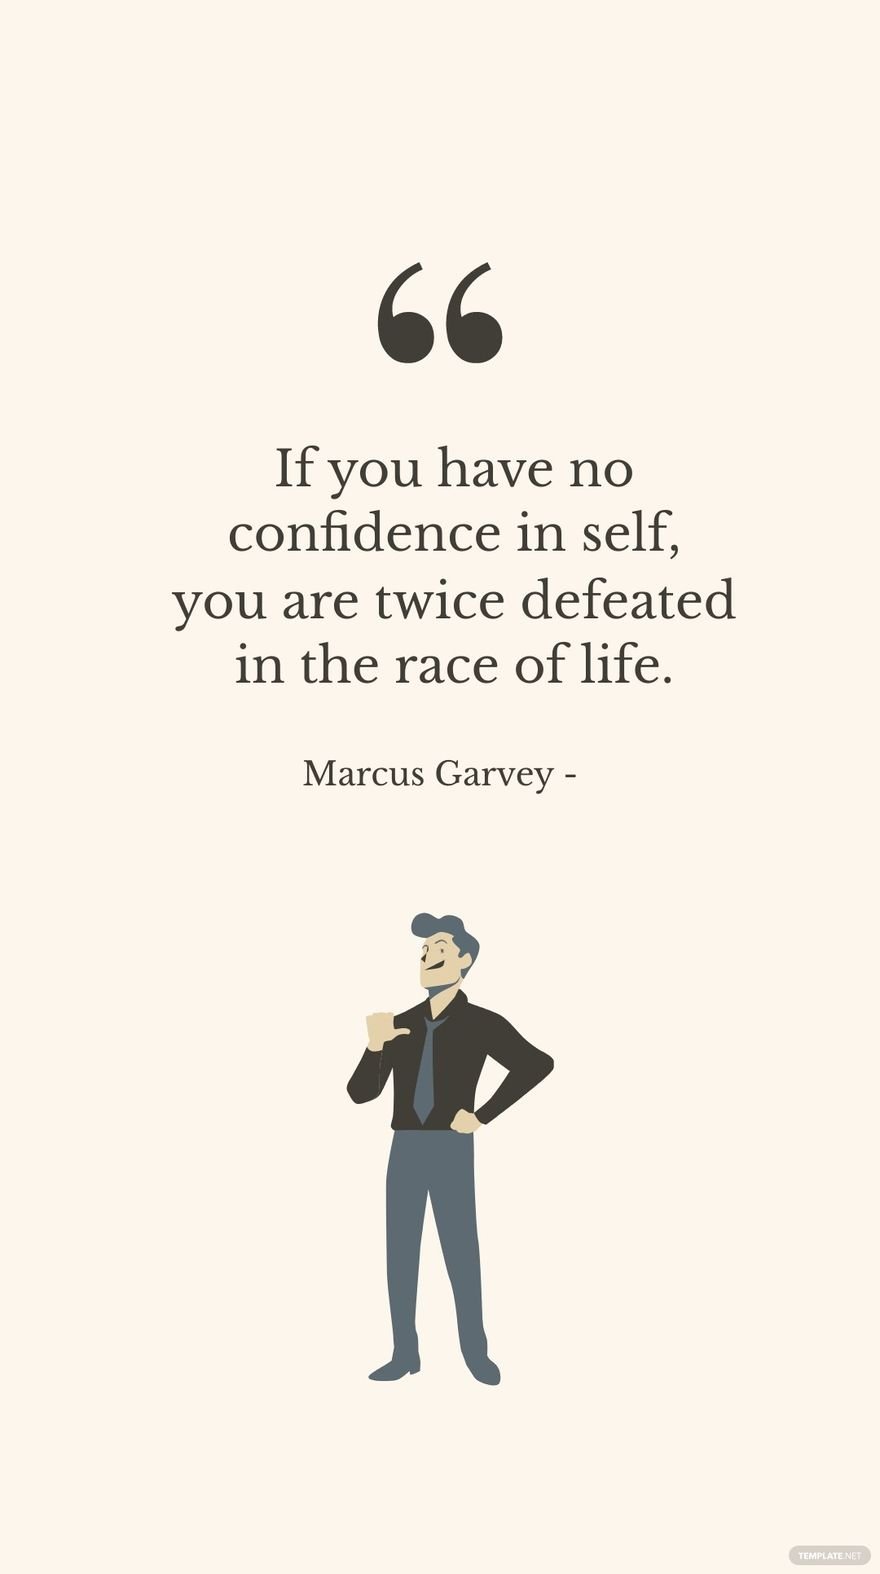 Free Marcus Garvey - If you have no confidence in self, you are twice defeated in the race of life. in JPG